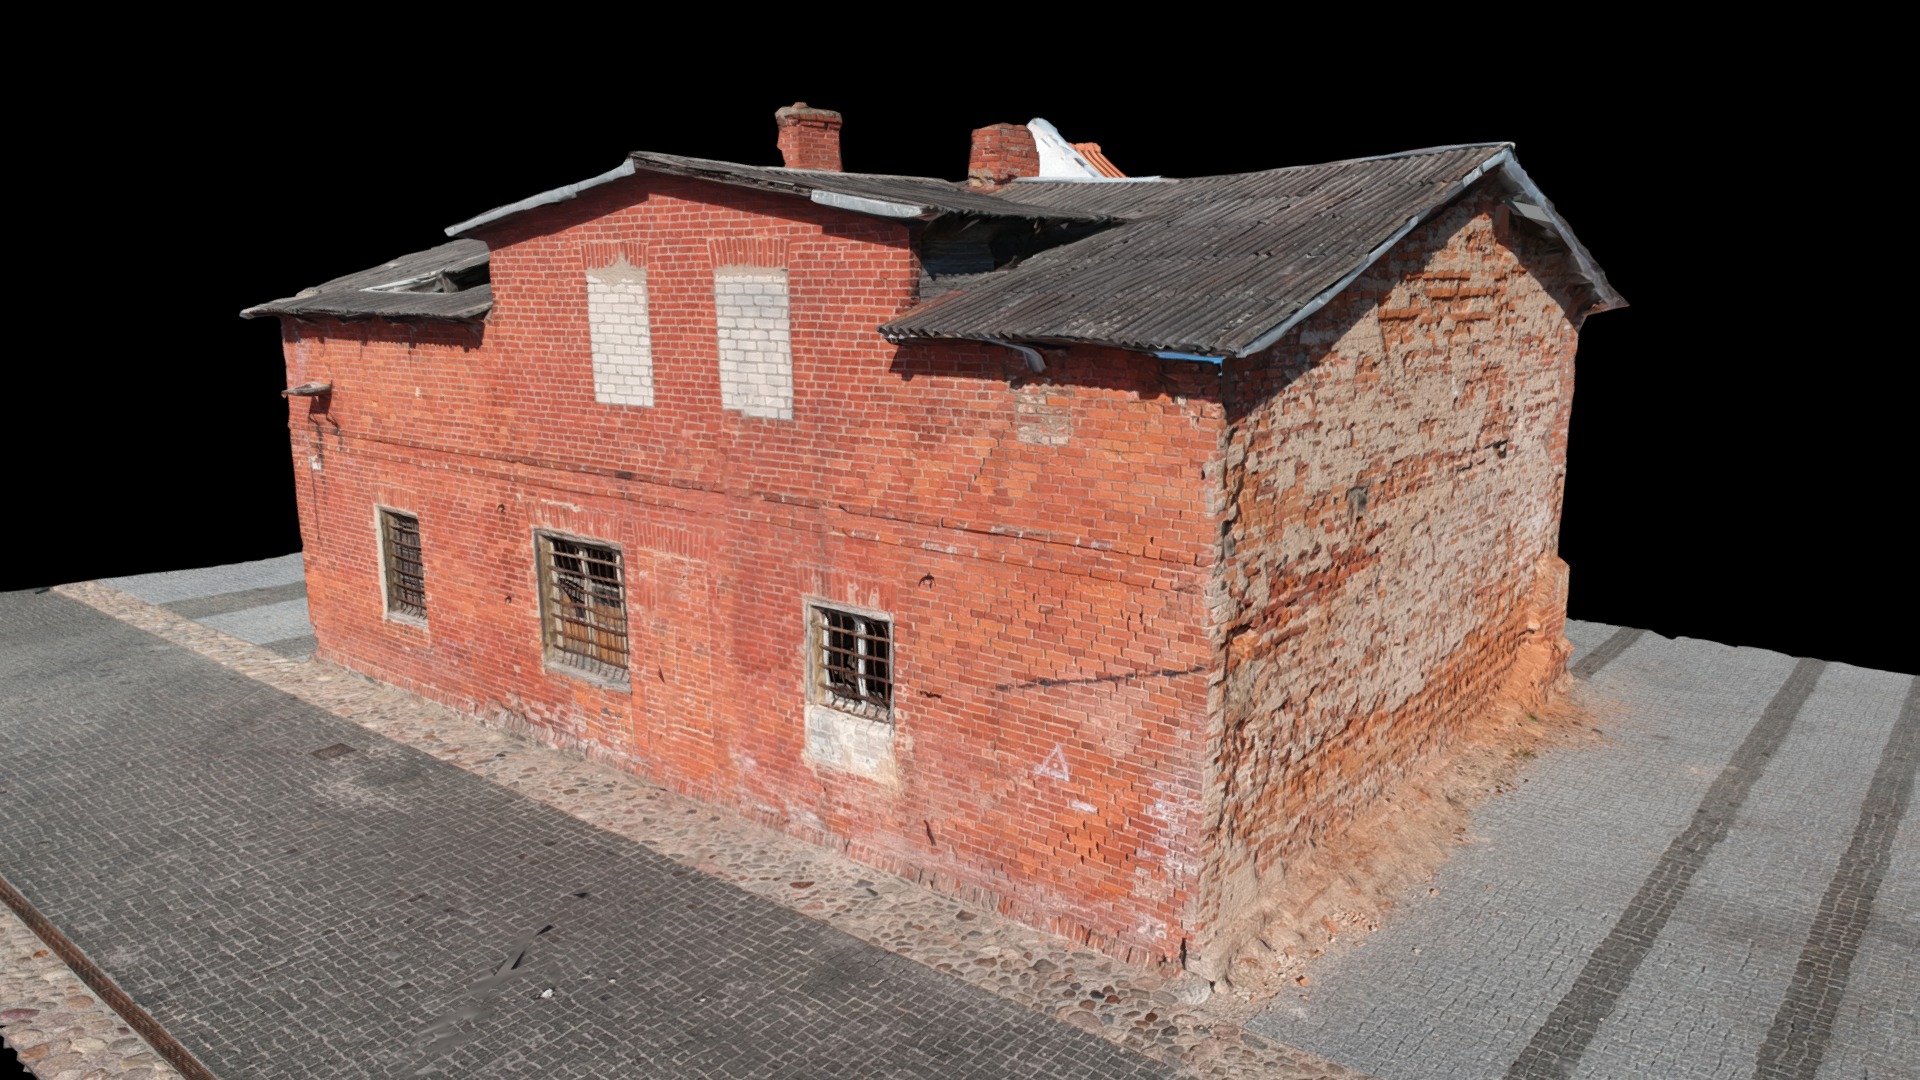 3D model Old Brick Building - This is a 3D model of the Old Brick Building. The 3D model is about a brick building with a black background.